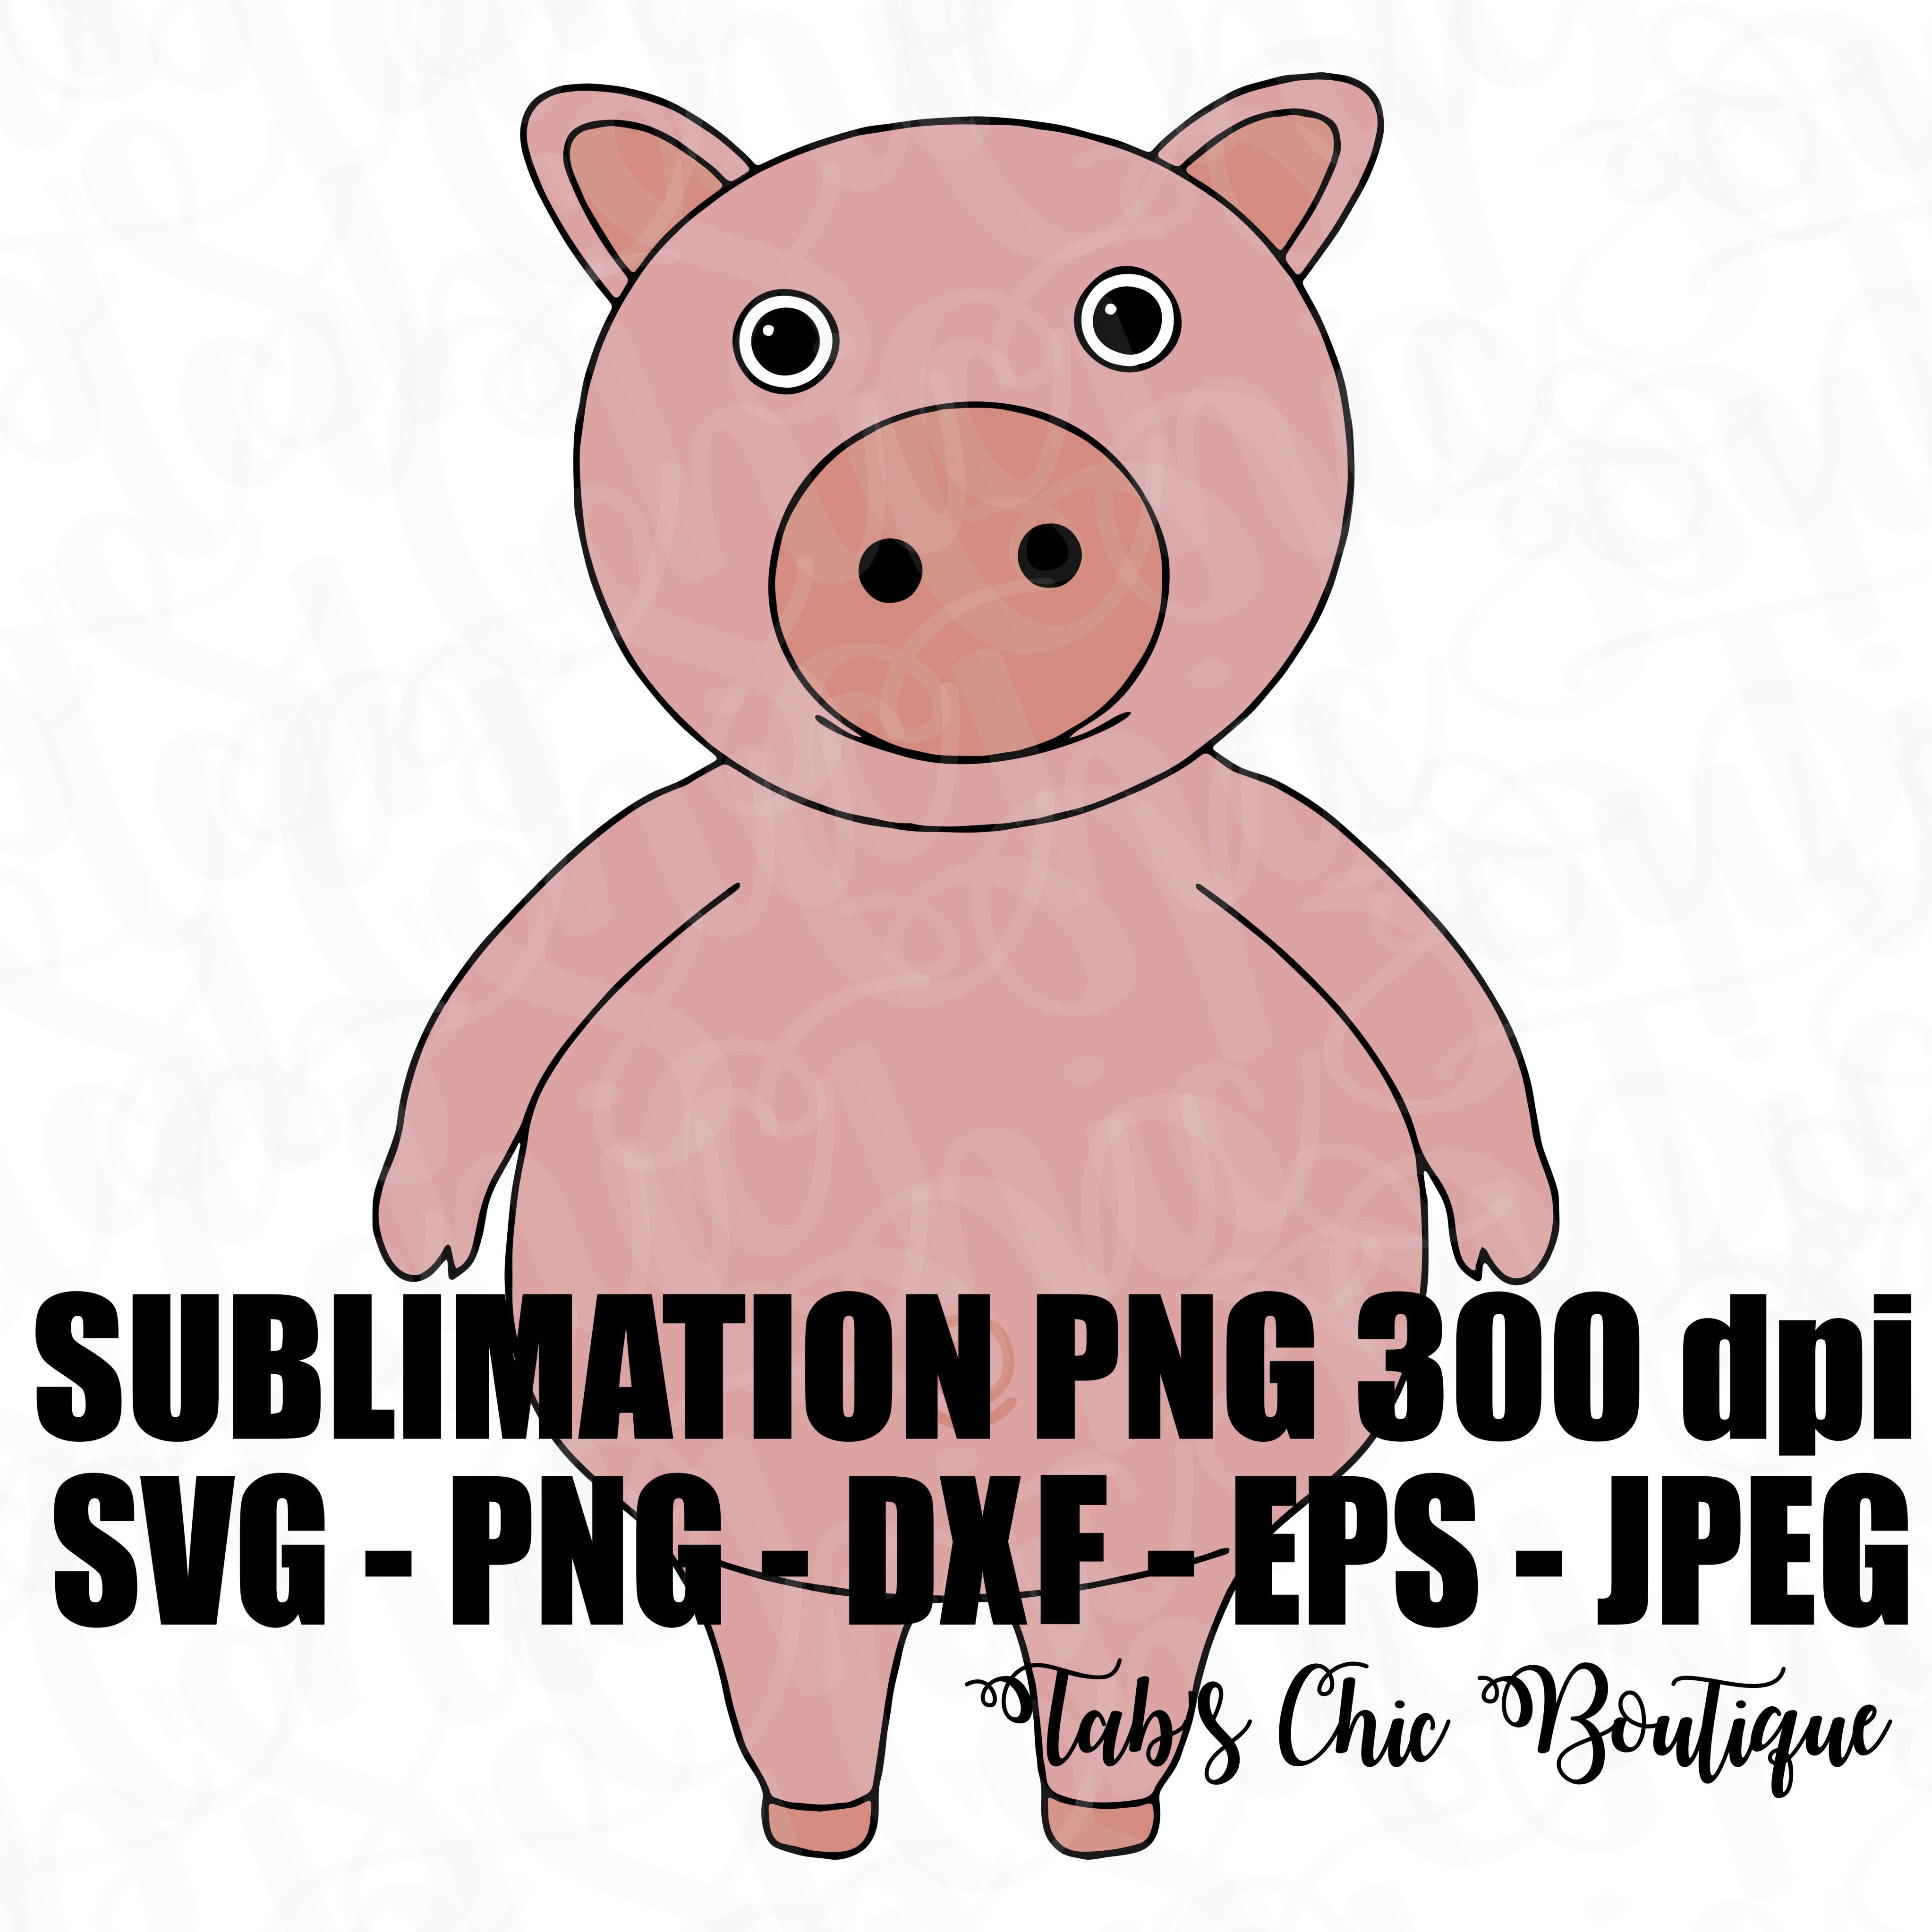 Download Pig Little Baby Bum Svg Jpeg High Def Dxf Png 300 Dpi Eps Sublimation Tab S Chic Boutique